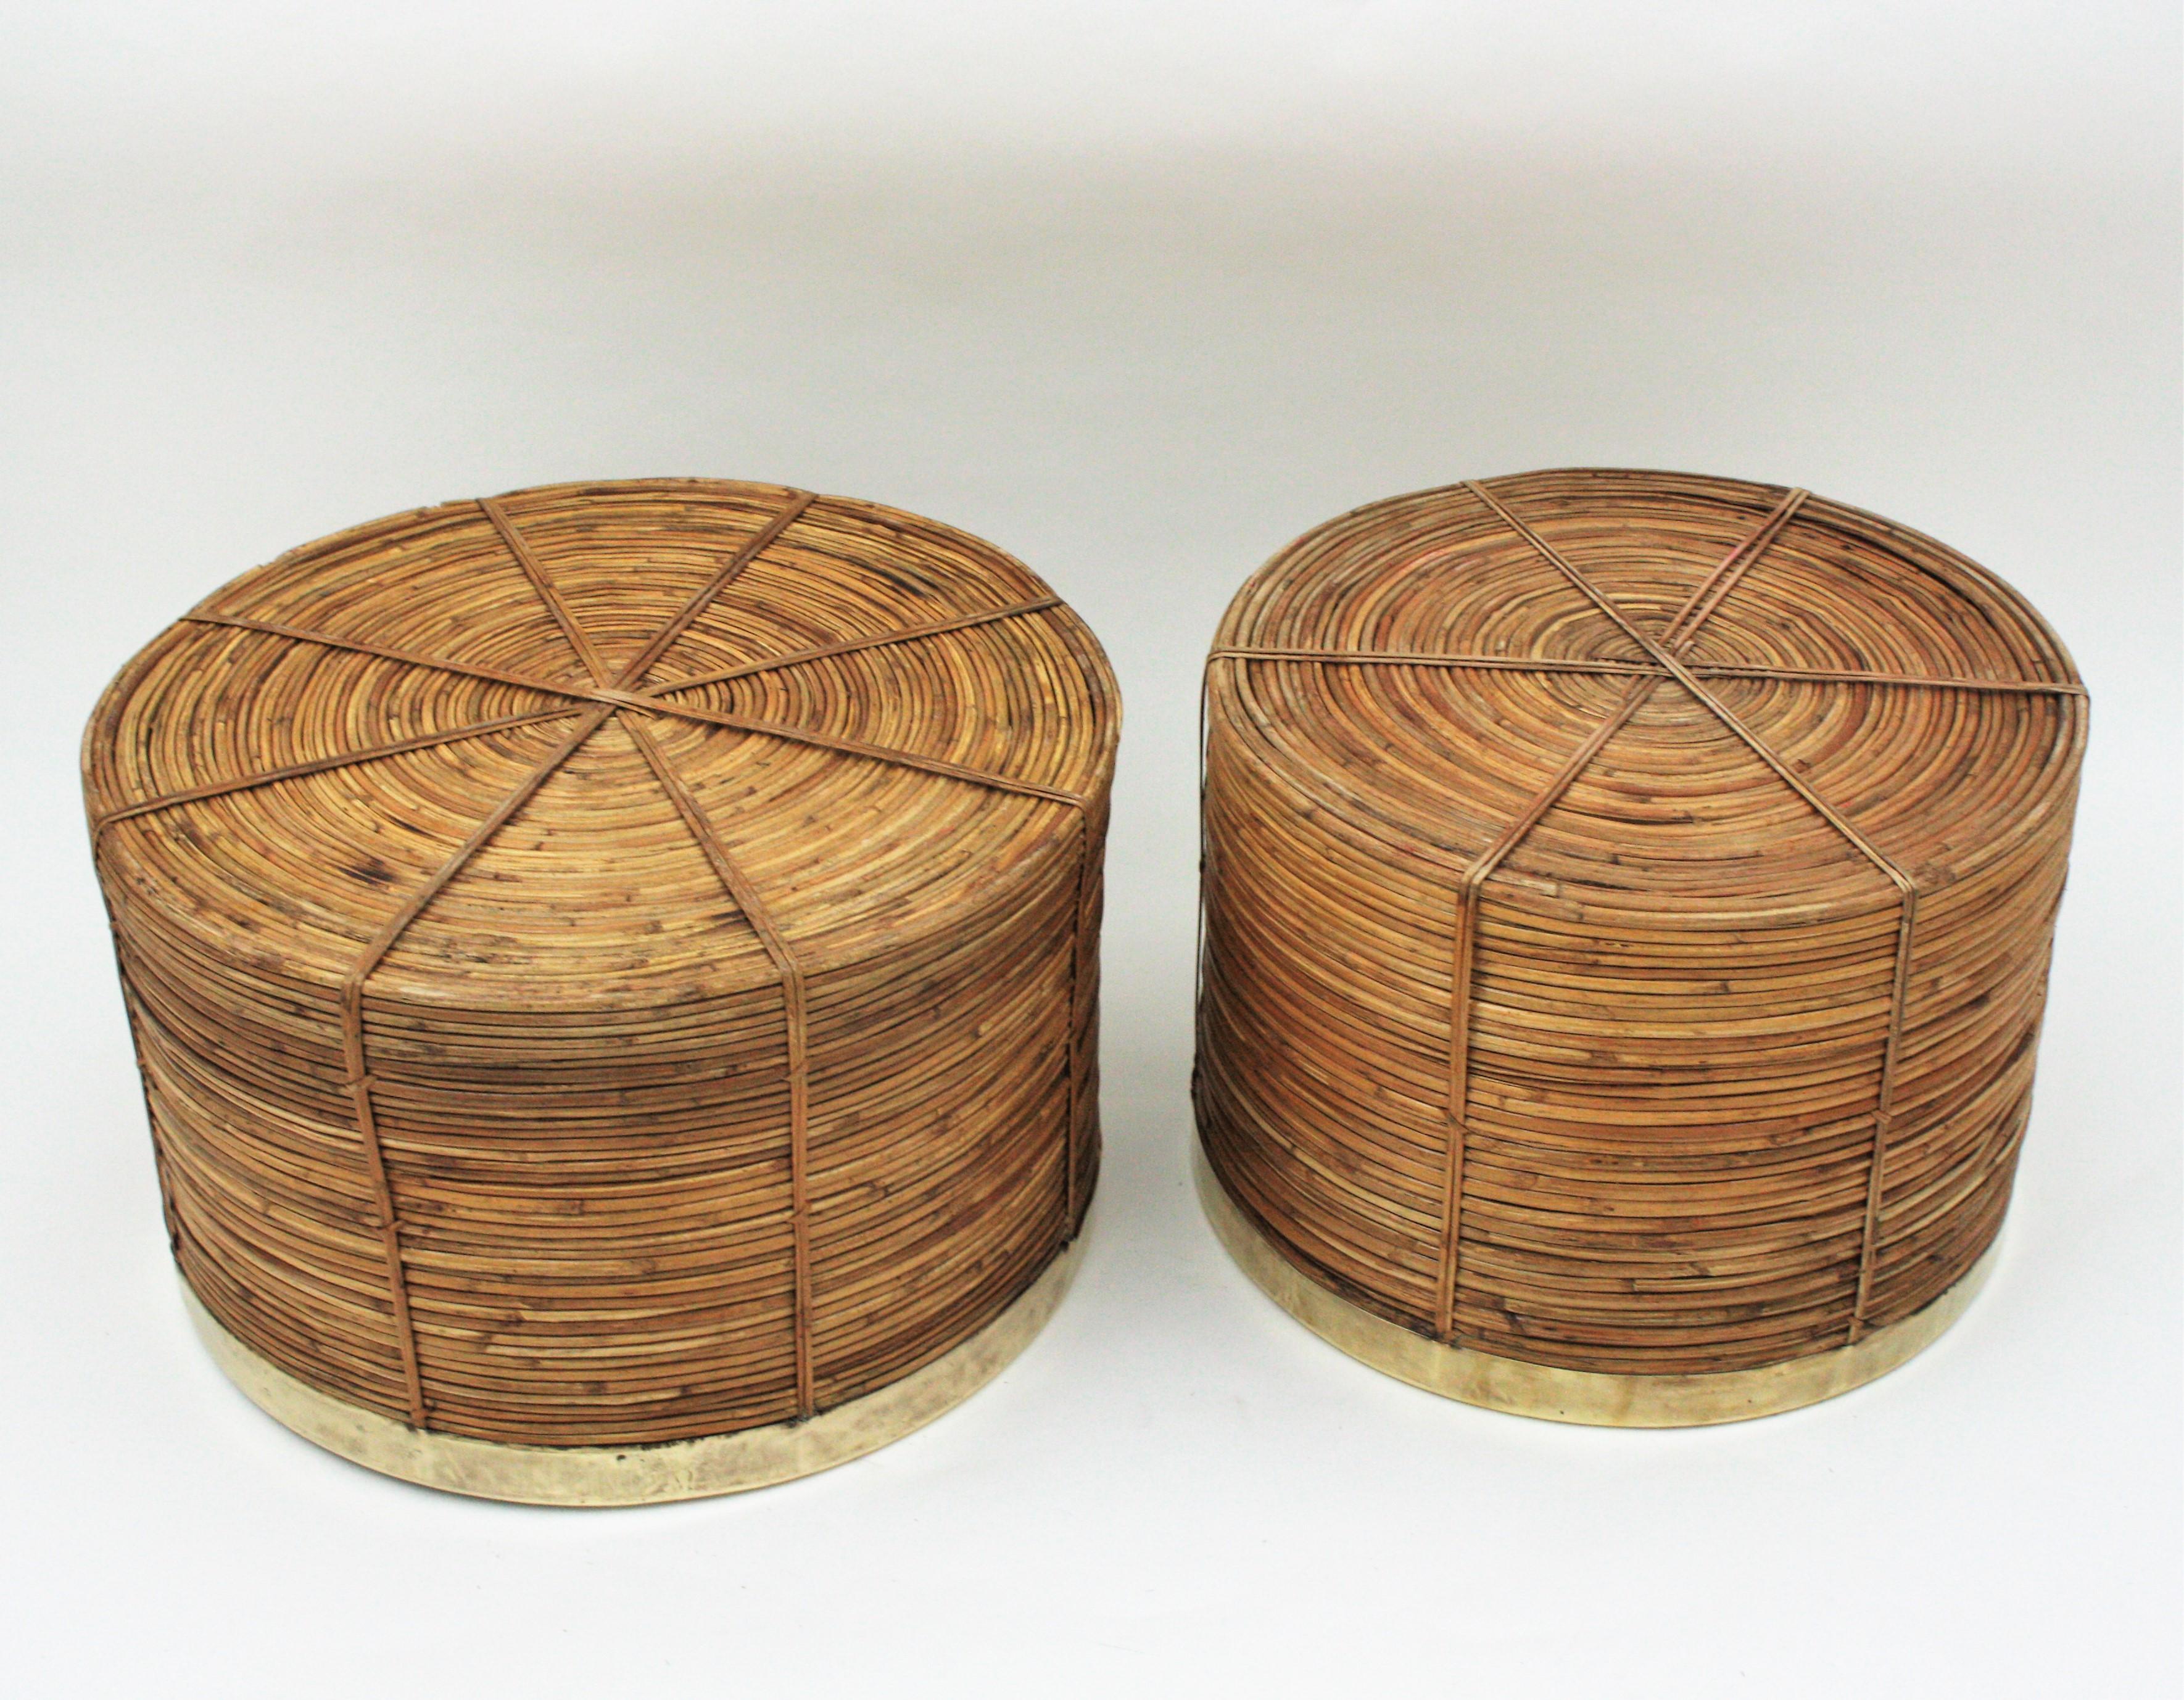 Pair of Extra Large Rattan Round Planters with Brass Rim, Italy, 1970s For Sale 6